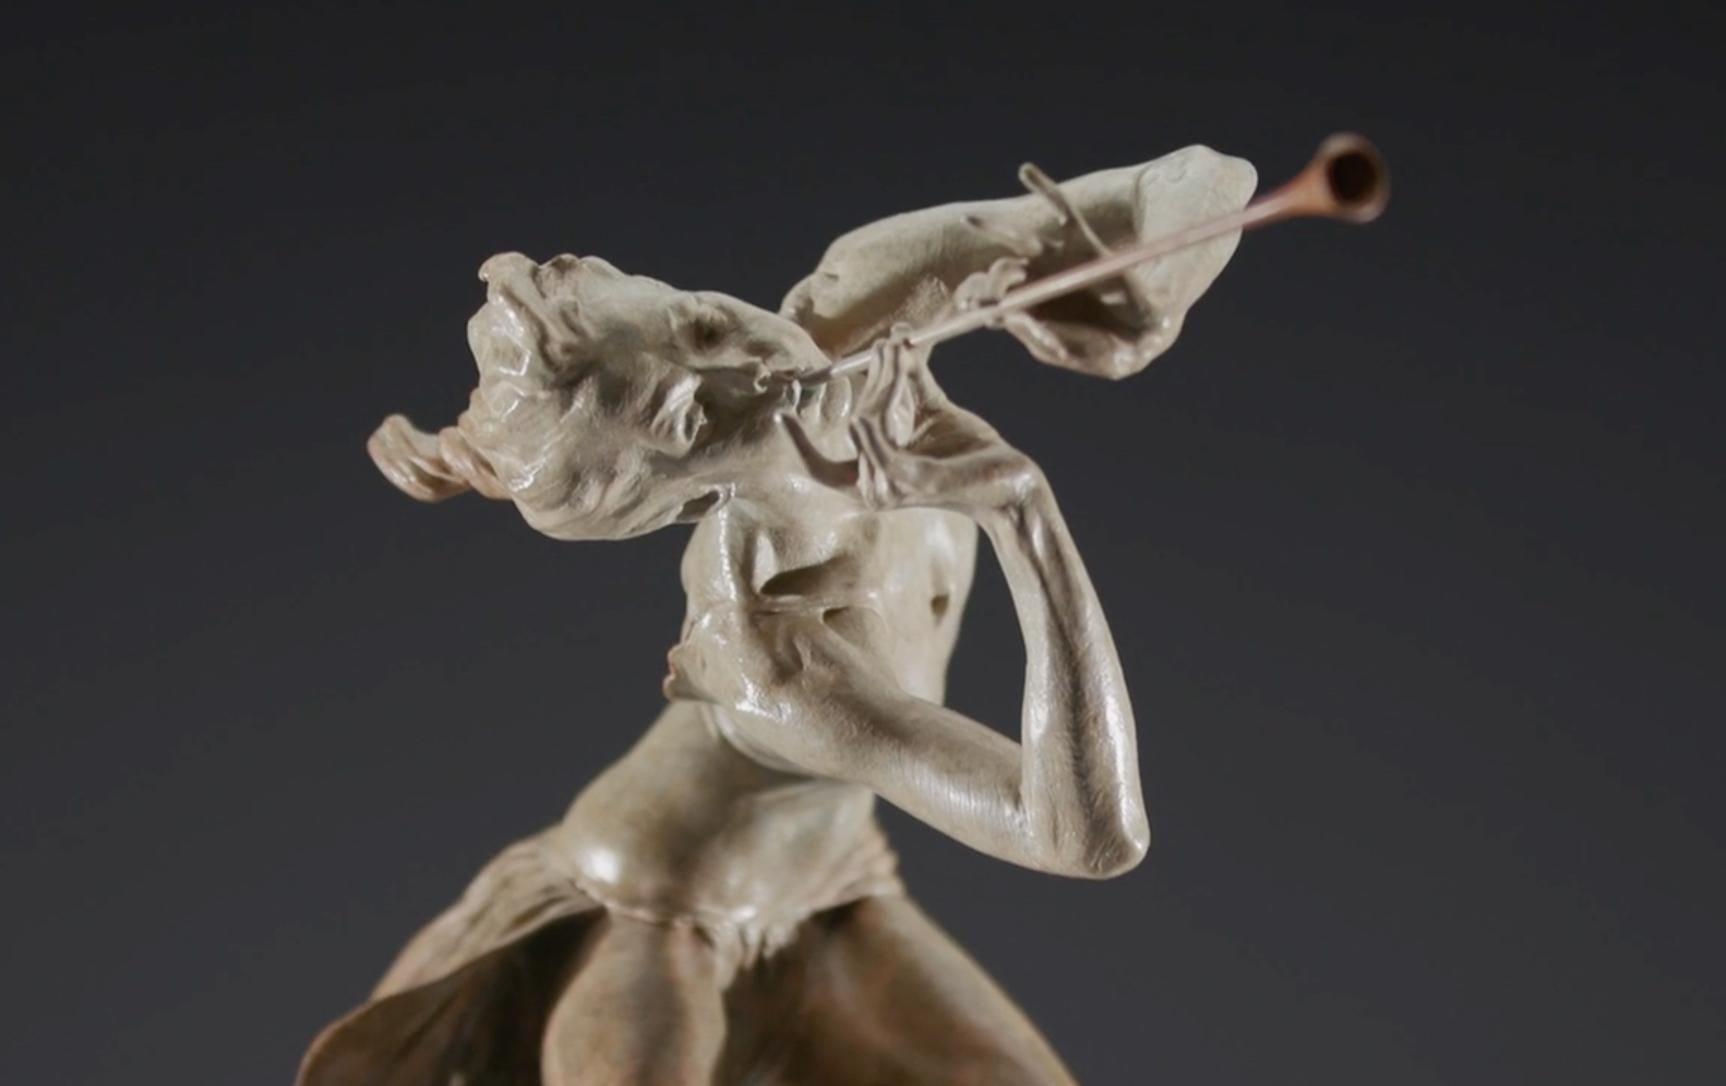 Trumpeter Draped, Atelier - Contemporary Sculpture by Richard MacDonald